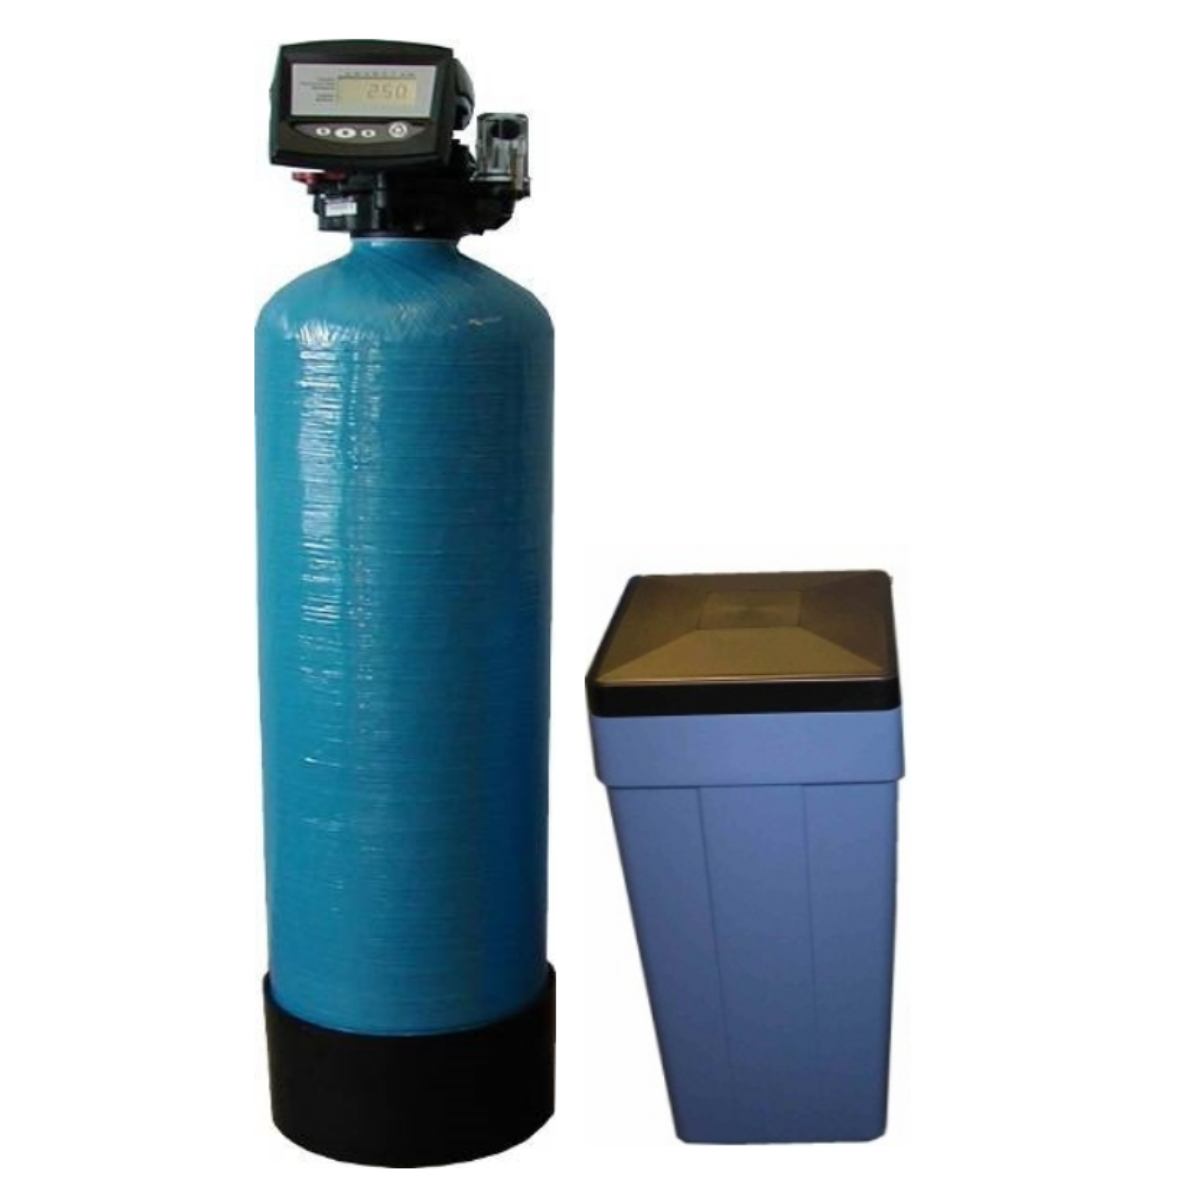 Simplex Autotrol 298 Time Based Controlled Commercial Water Softener 30" x 72", 500 Litres